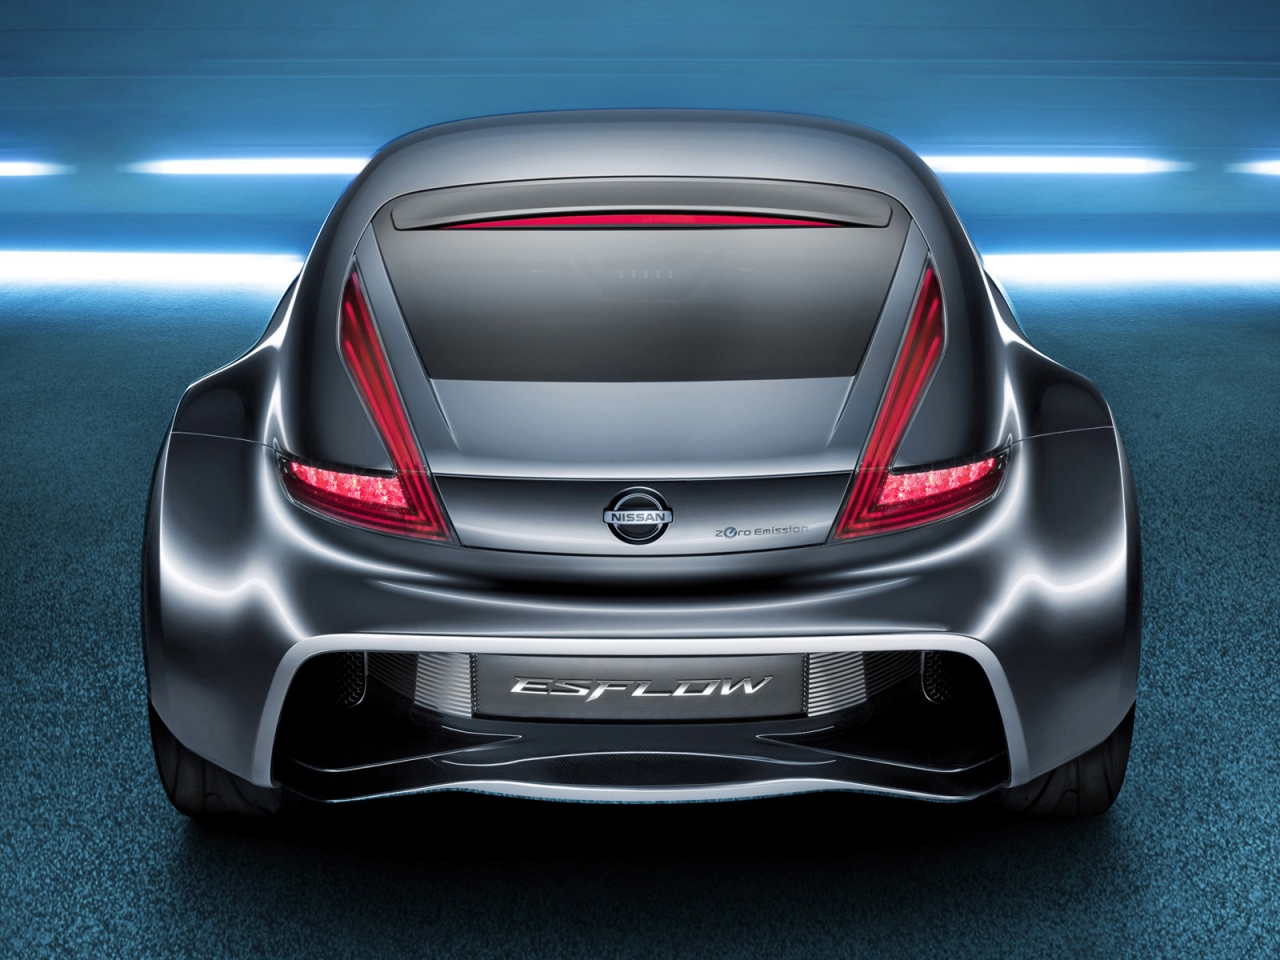 Nissan Esflow Concept Rear for 1280 x 960 resolution